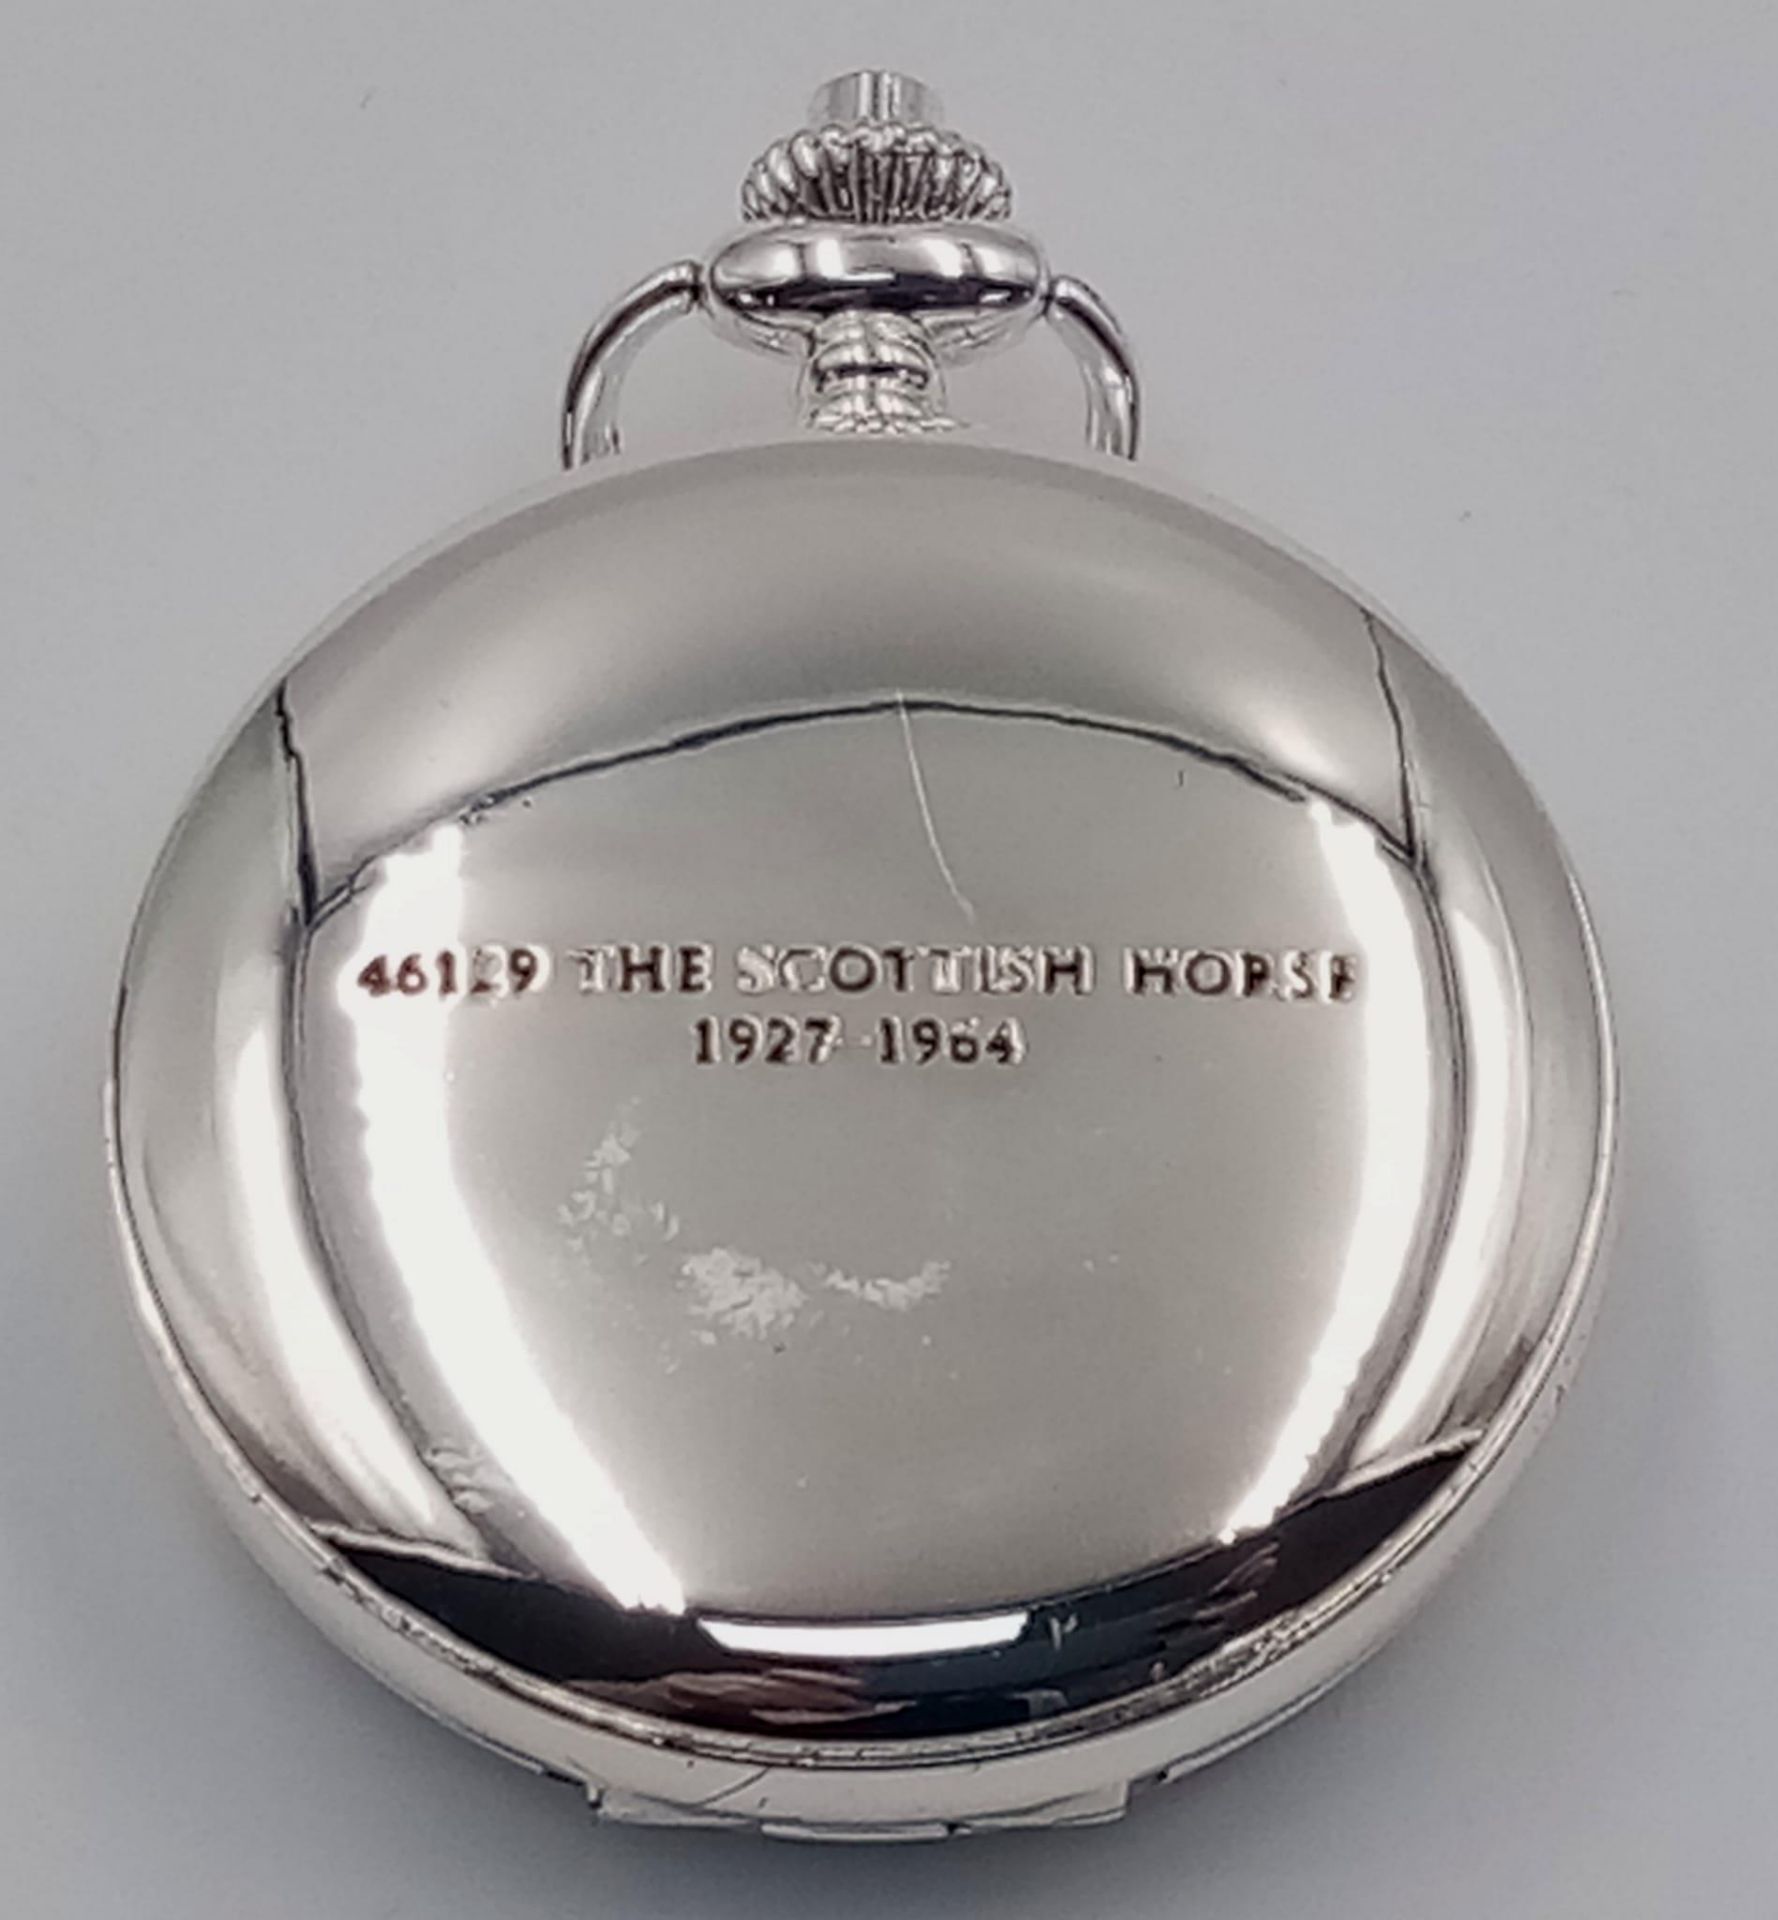 A Manual Wind Silver Plated Pocket Watch Detailing the Steam Train ‘The Scottish Horse-1927-1964’, - Bild 3 aus 9